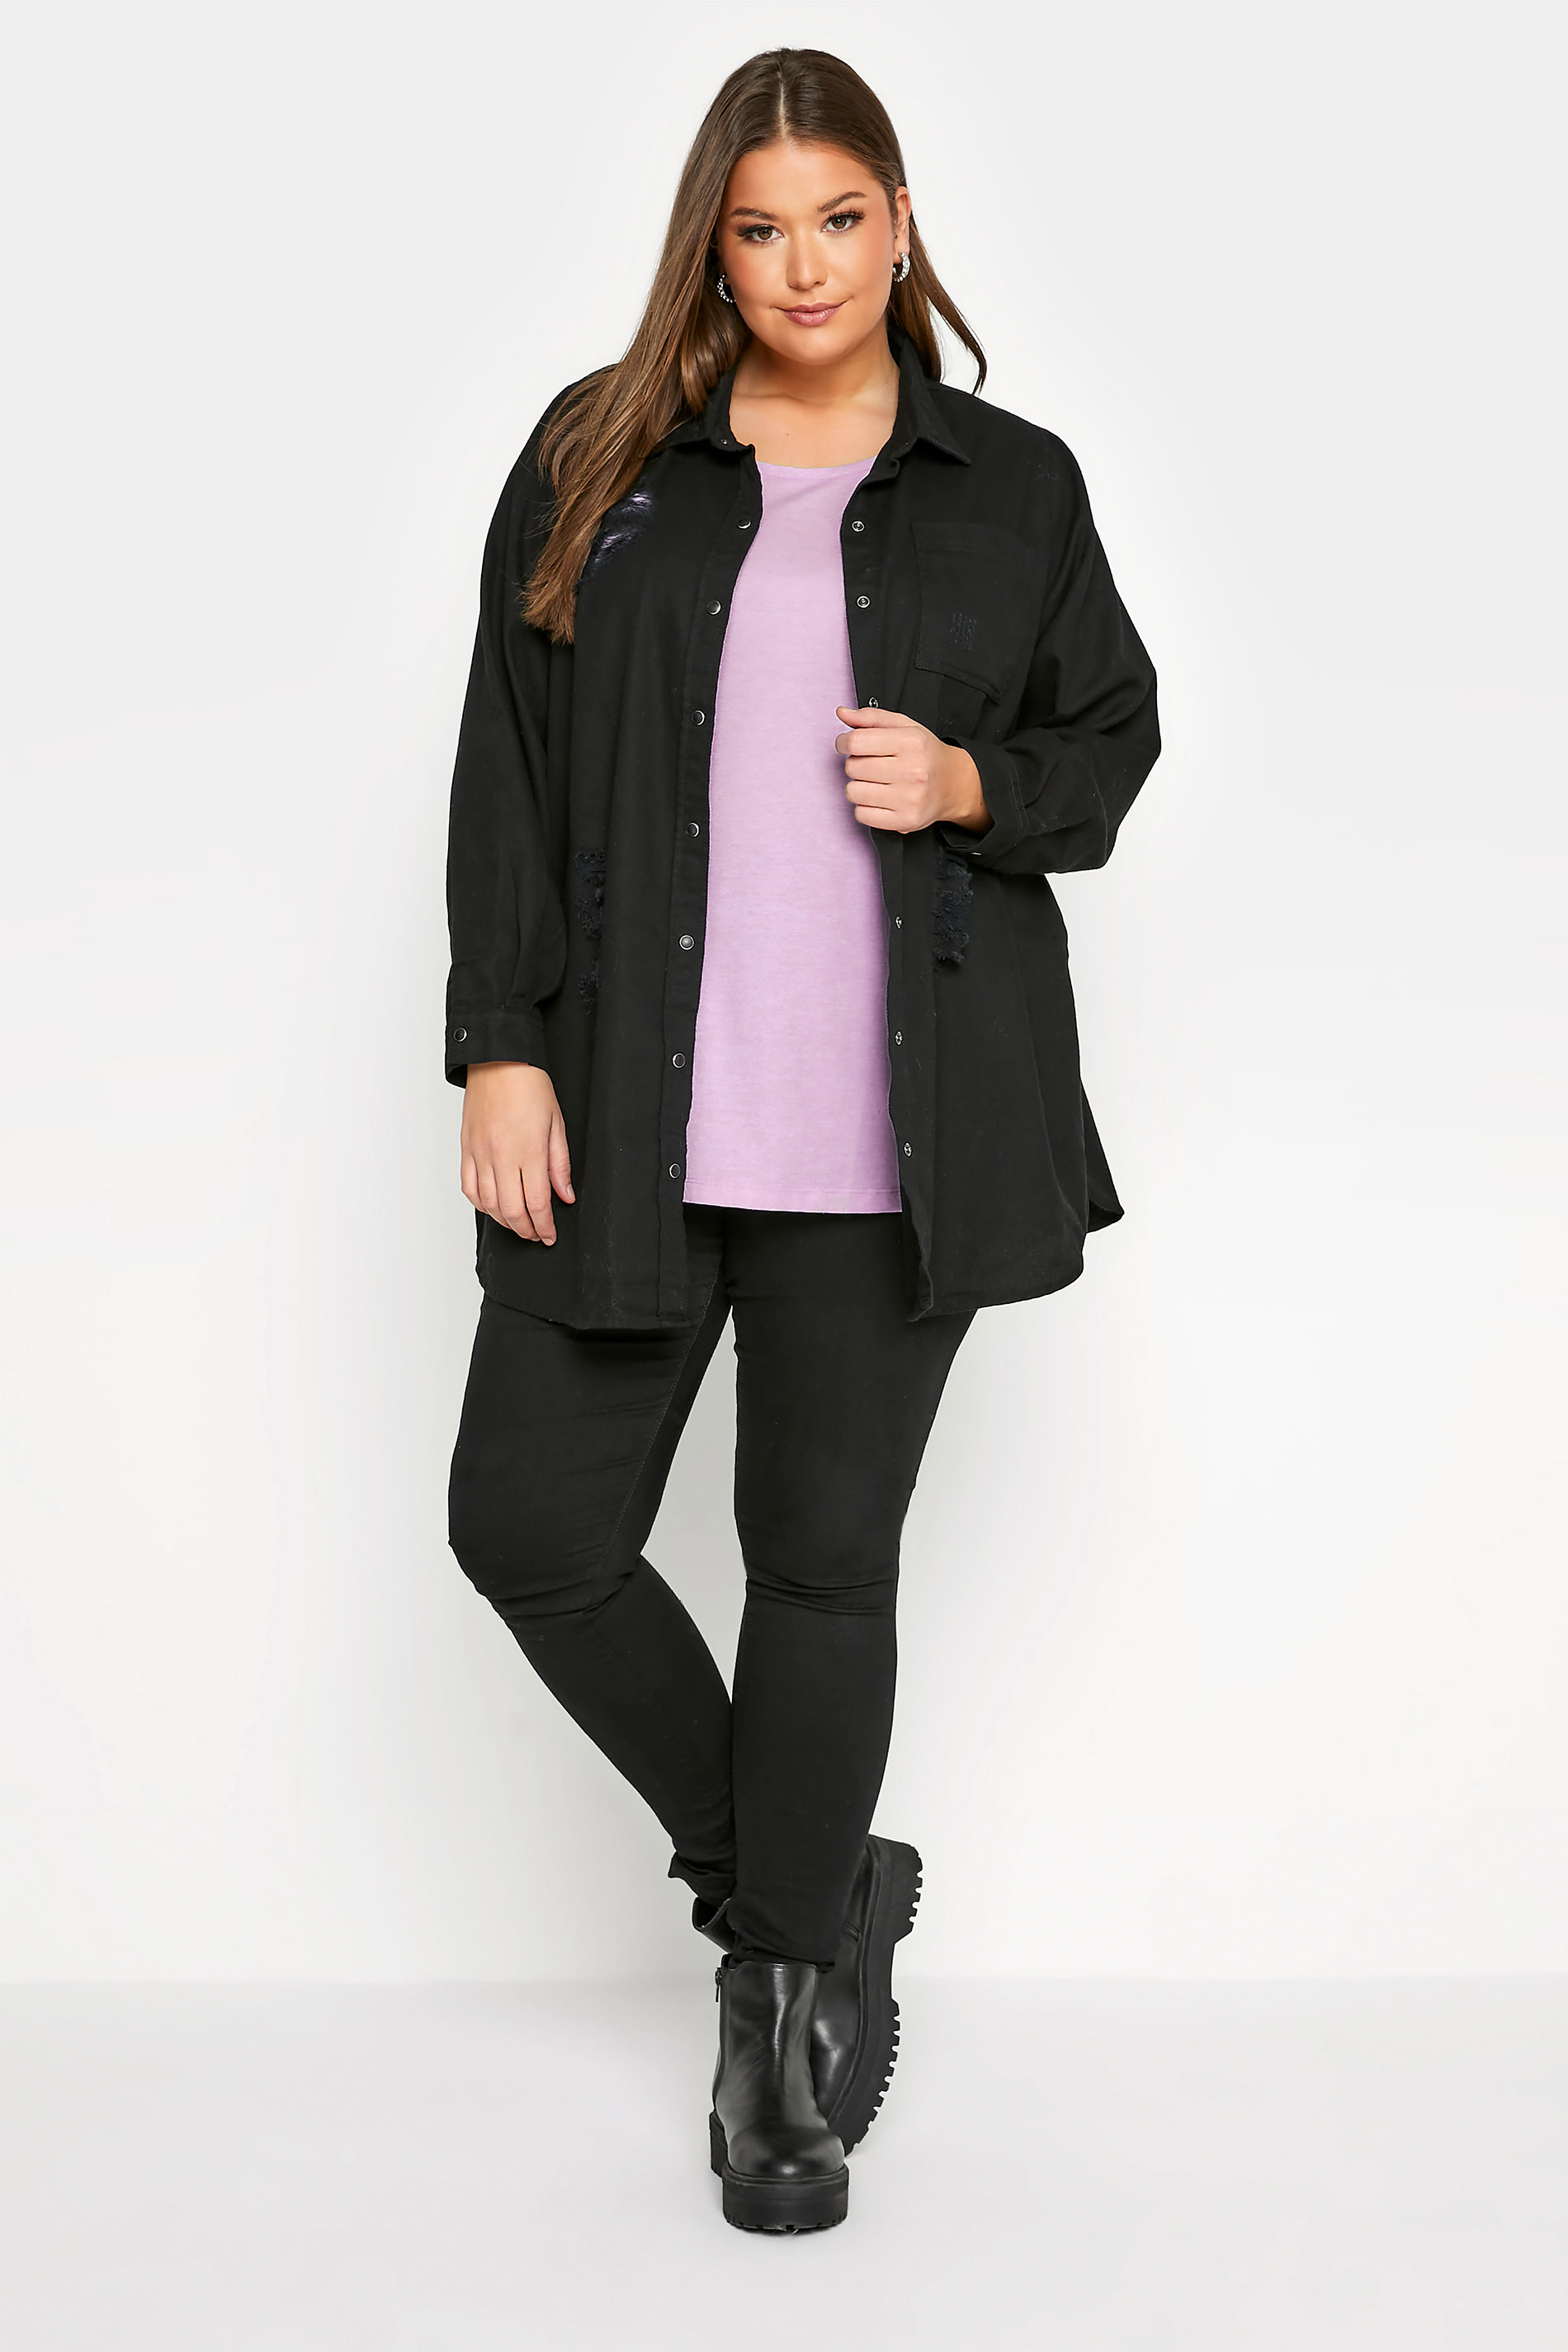 Grande taille  Tops Grande taille  Tops Jersey | T-Shirt Couleur Lavande Manches Courtes - TS10268